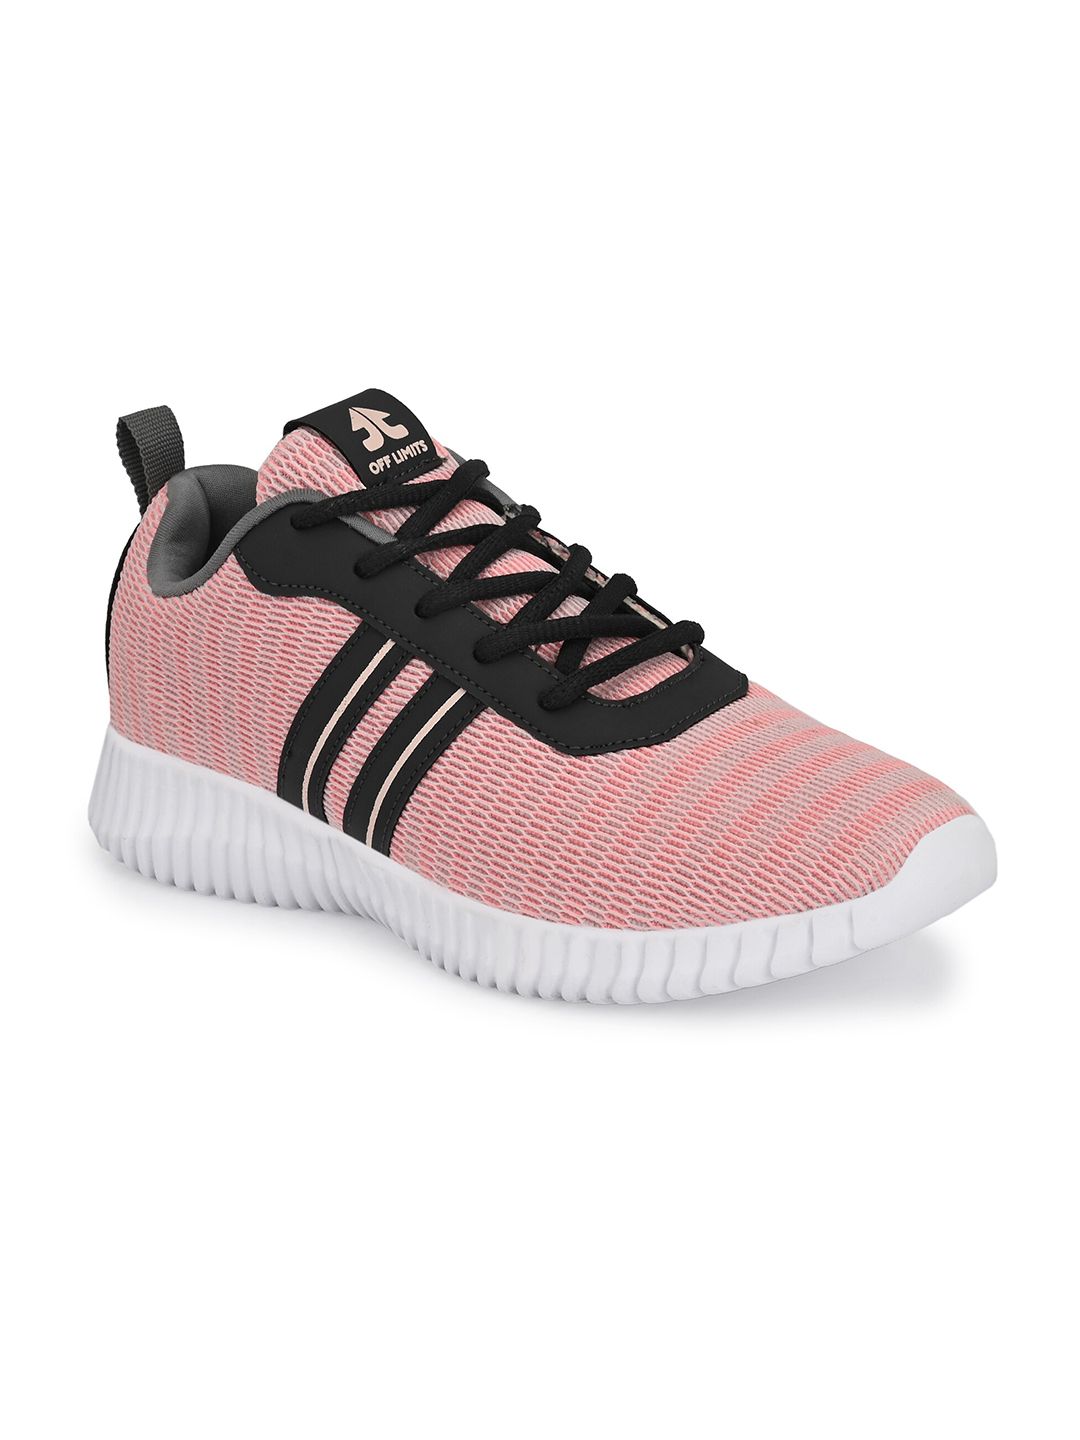 OFF LIMITS Women Peach-Coloured Running Shoes Price in India